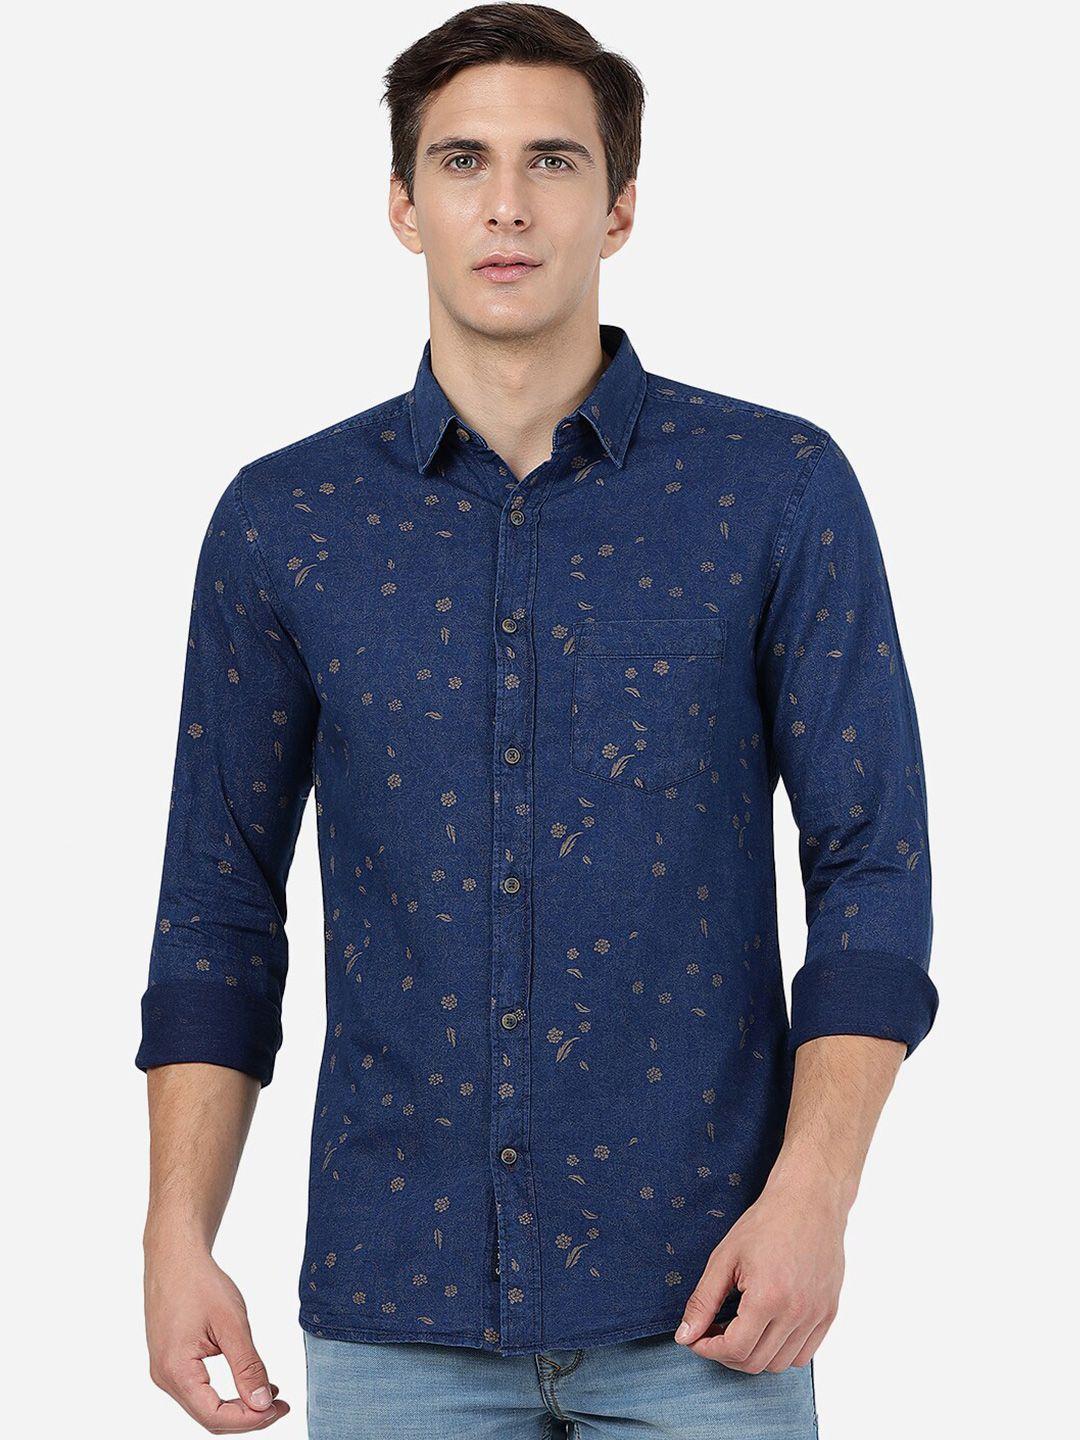 jade blue floral printed slim fit opaque cotton casual shirt